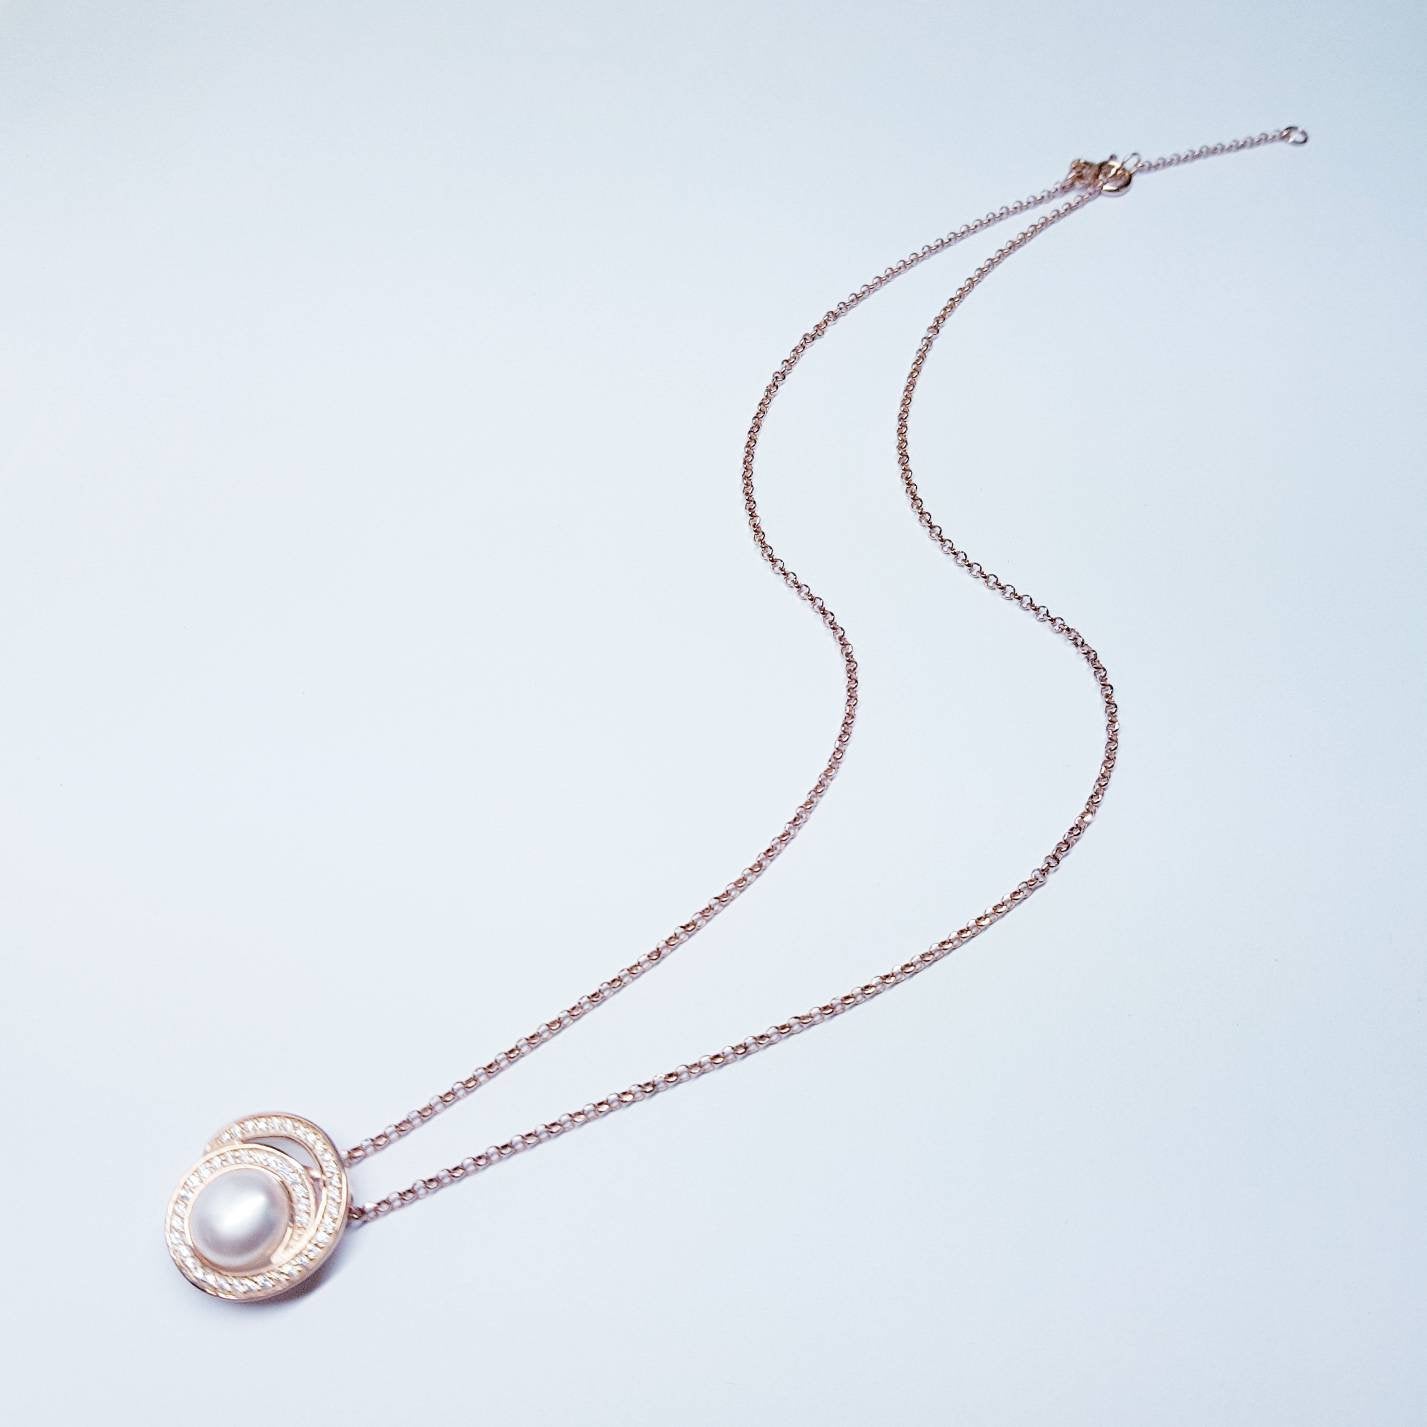 Rose gold pearl Pendant, Sterling silver pearl Pendant, Classic Jewelry, Real Pearl necklace, Elegant Pendant